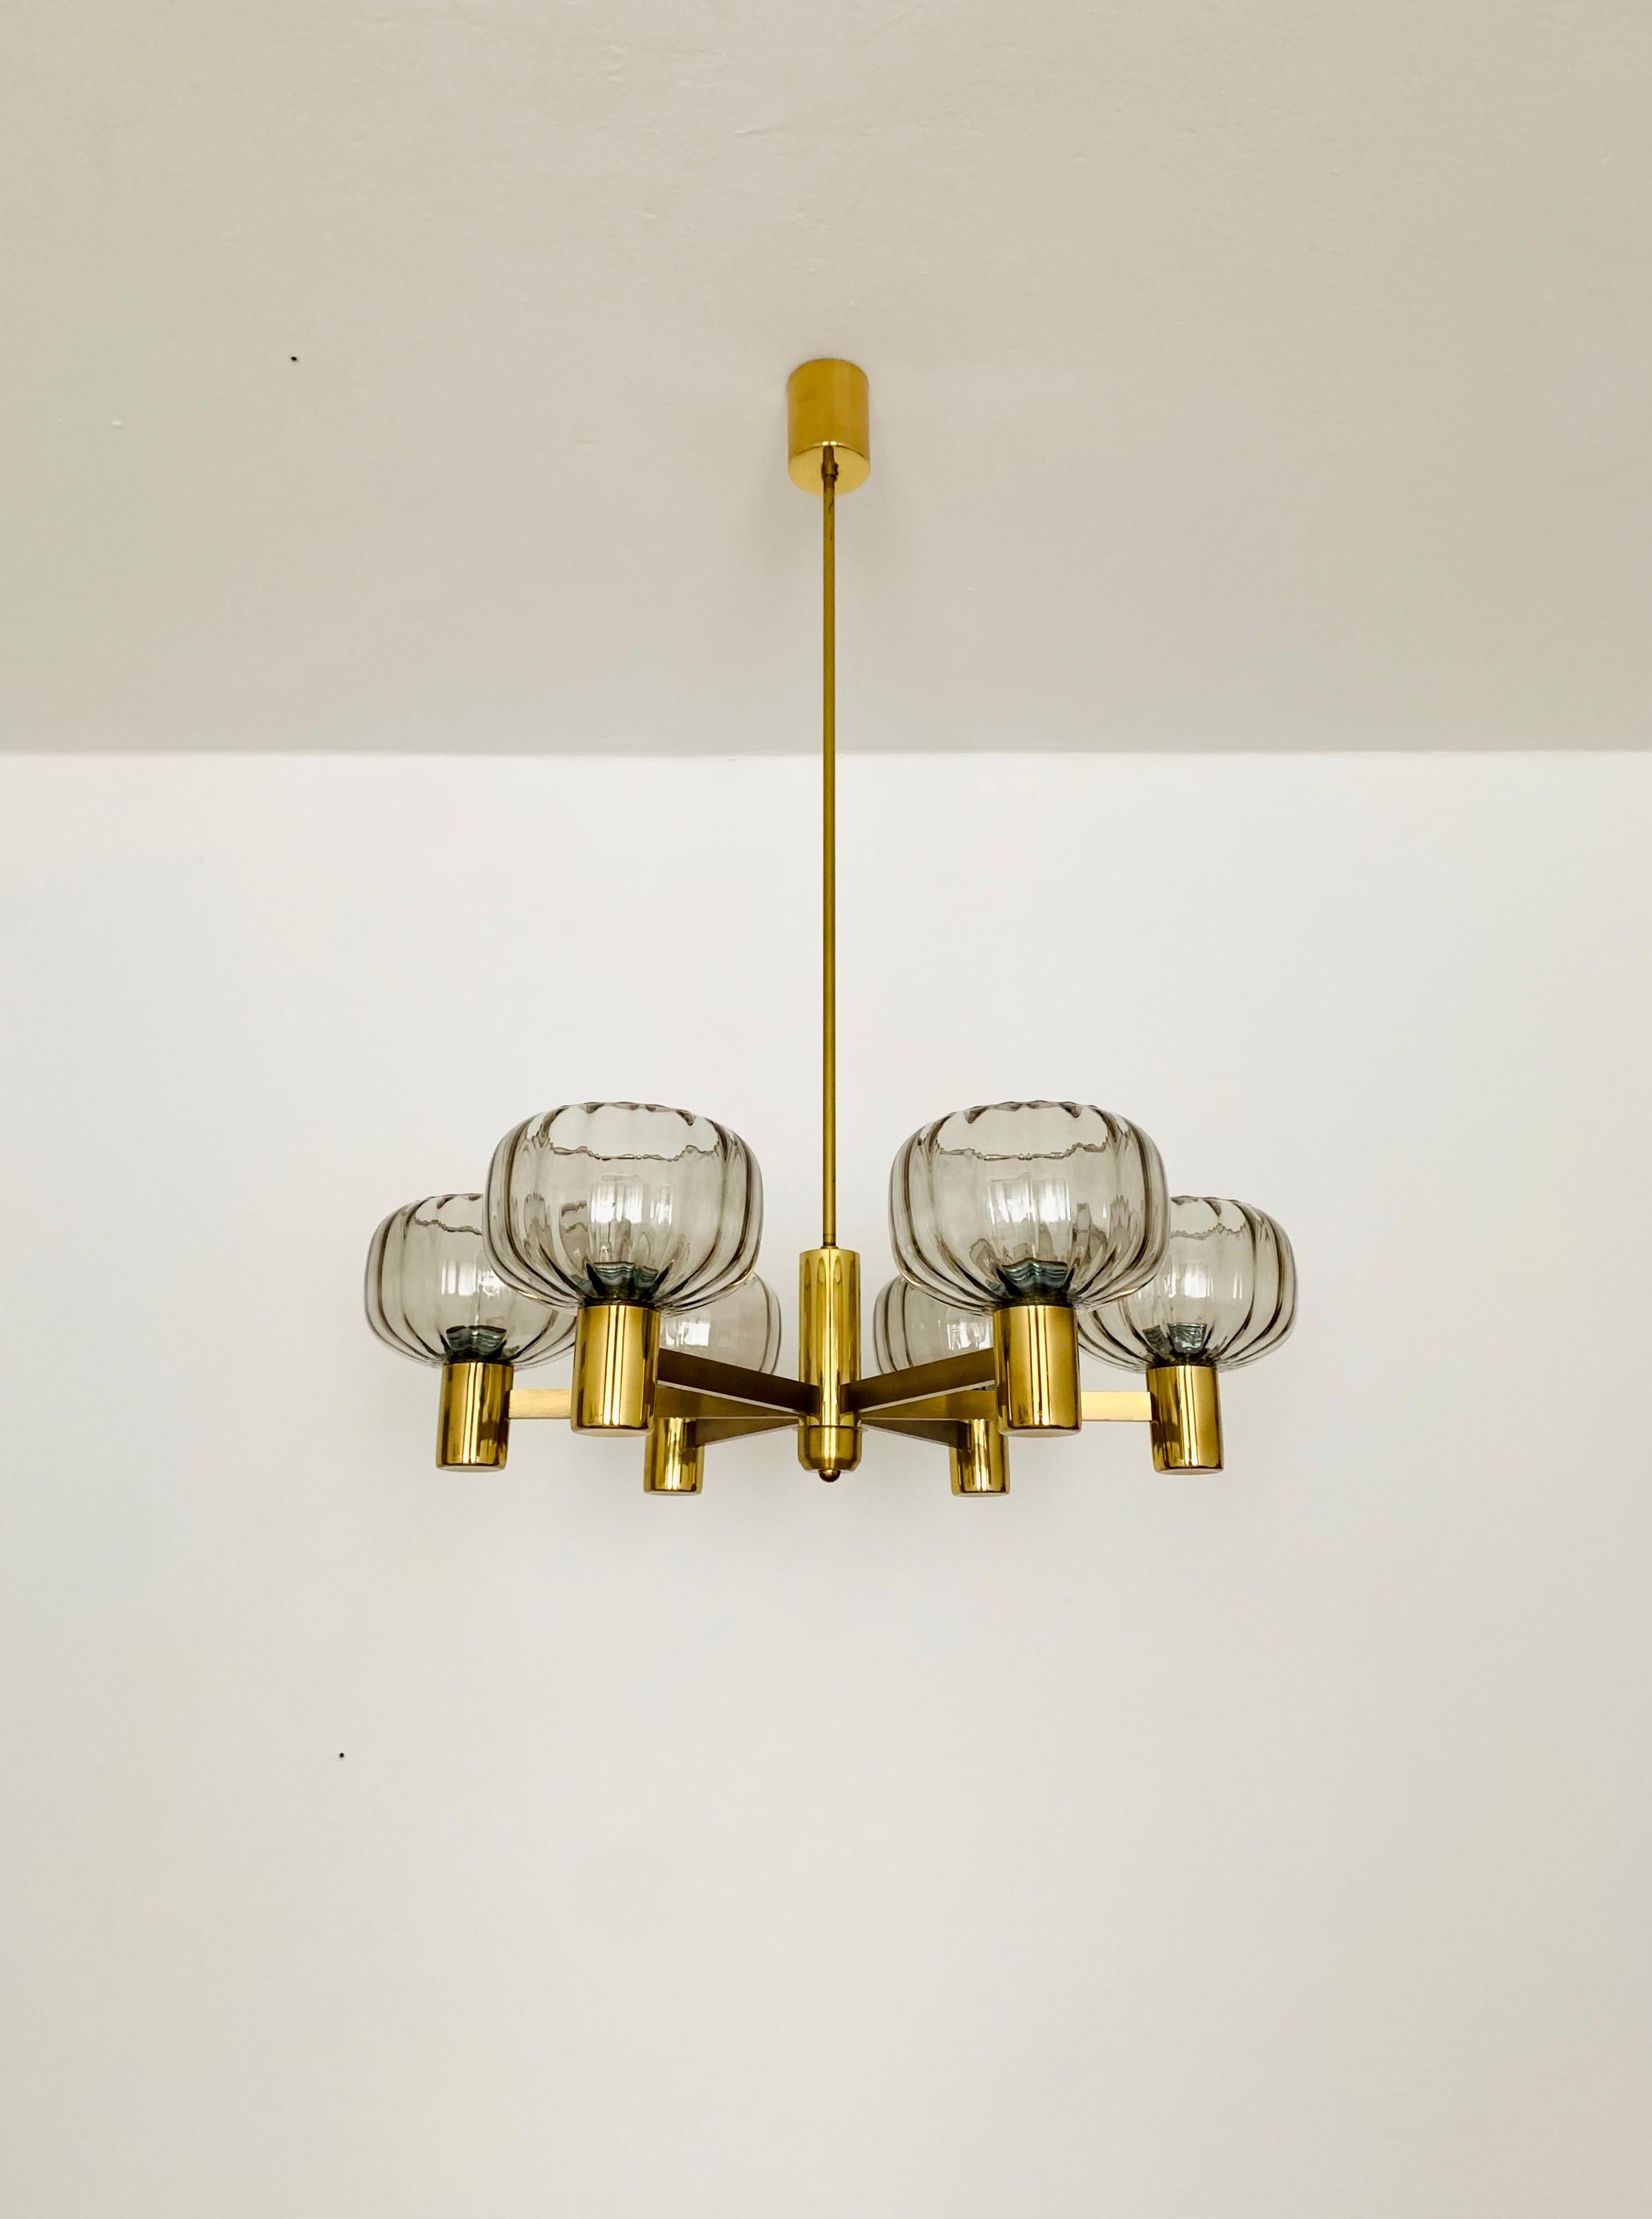 Very nice chandelier from the 1960s.
The 6 lampshades spread a spectacular light.
The lamp is manufactured to a very high quality.
Very contemporary design with a fantastic, elegant look.

Condition:

Very good vintage condition with slight signs of